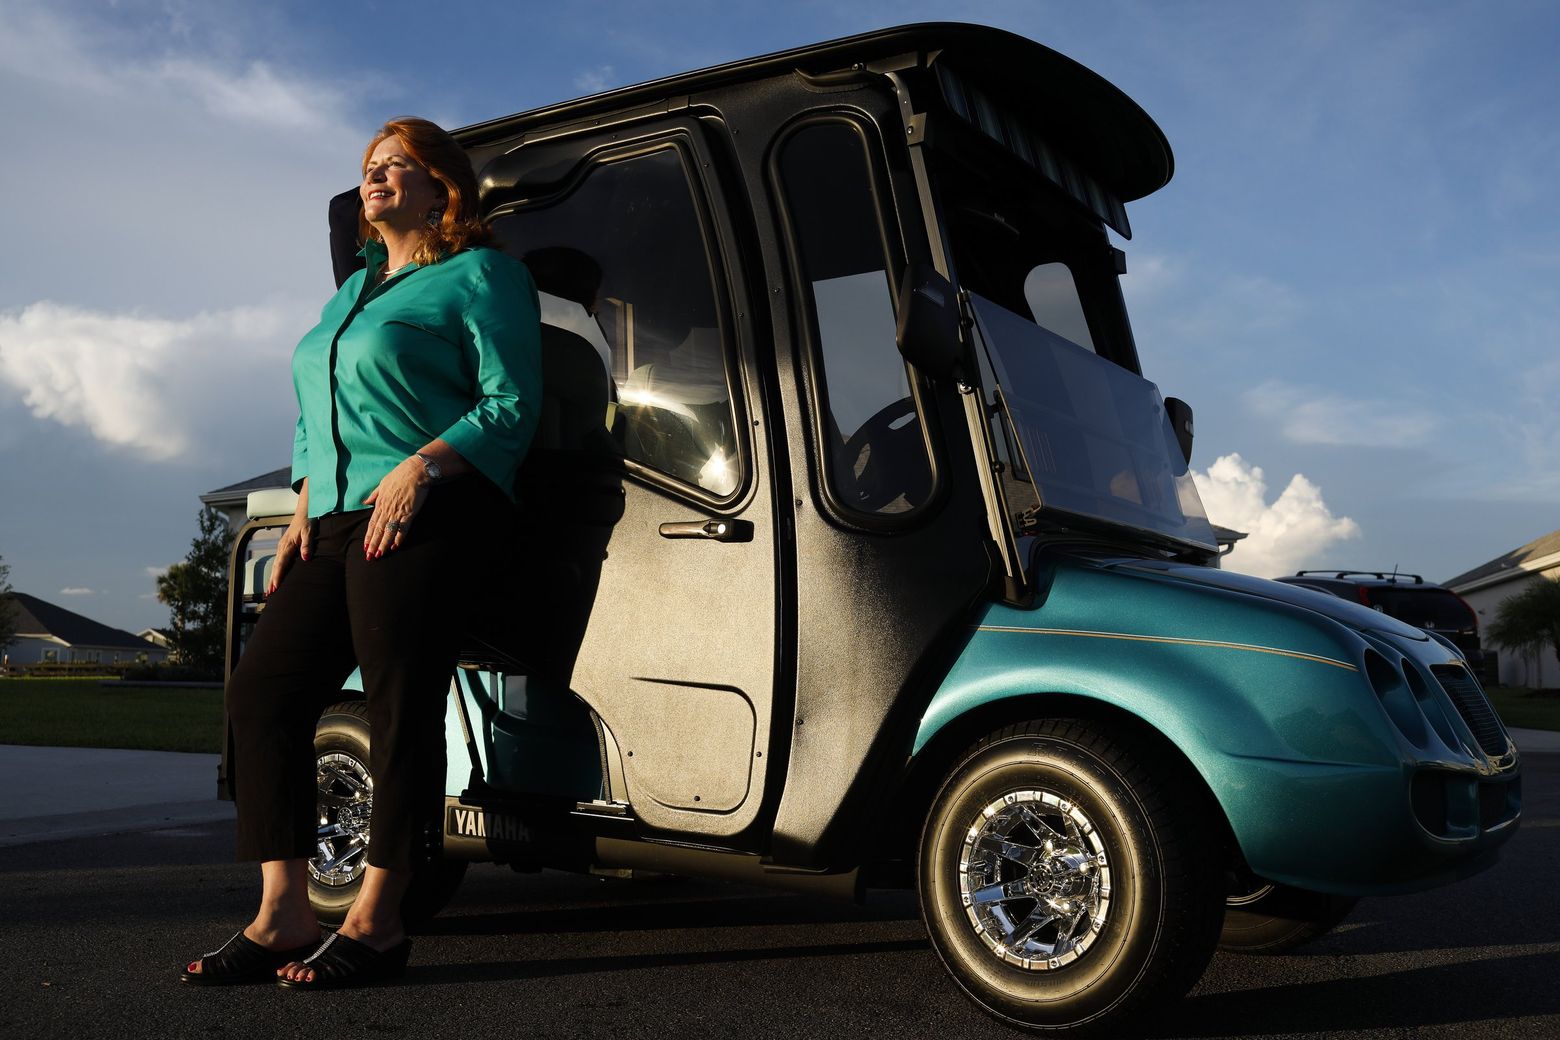 Harbor Marked Generally speaking Kind of blingy': The tricked-out golf carts of the Villages, Florida | The  Seattle Times